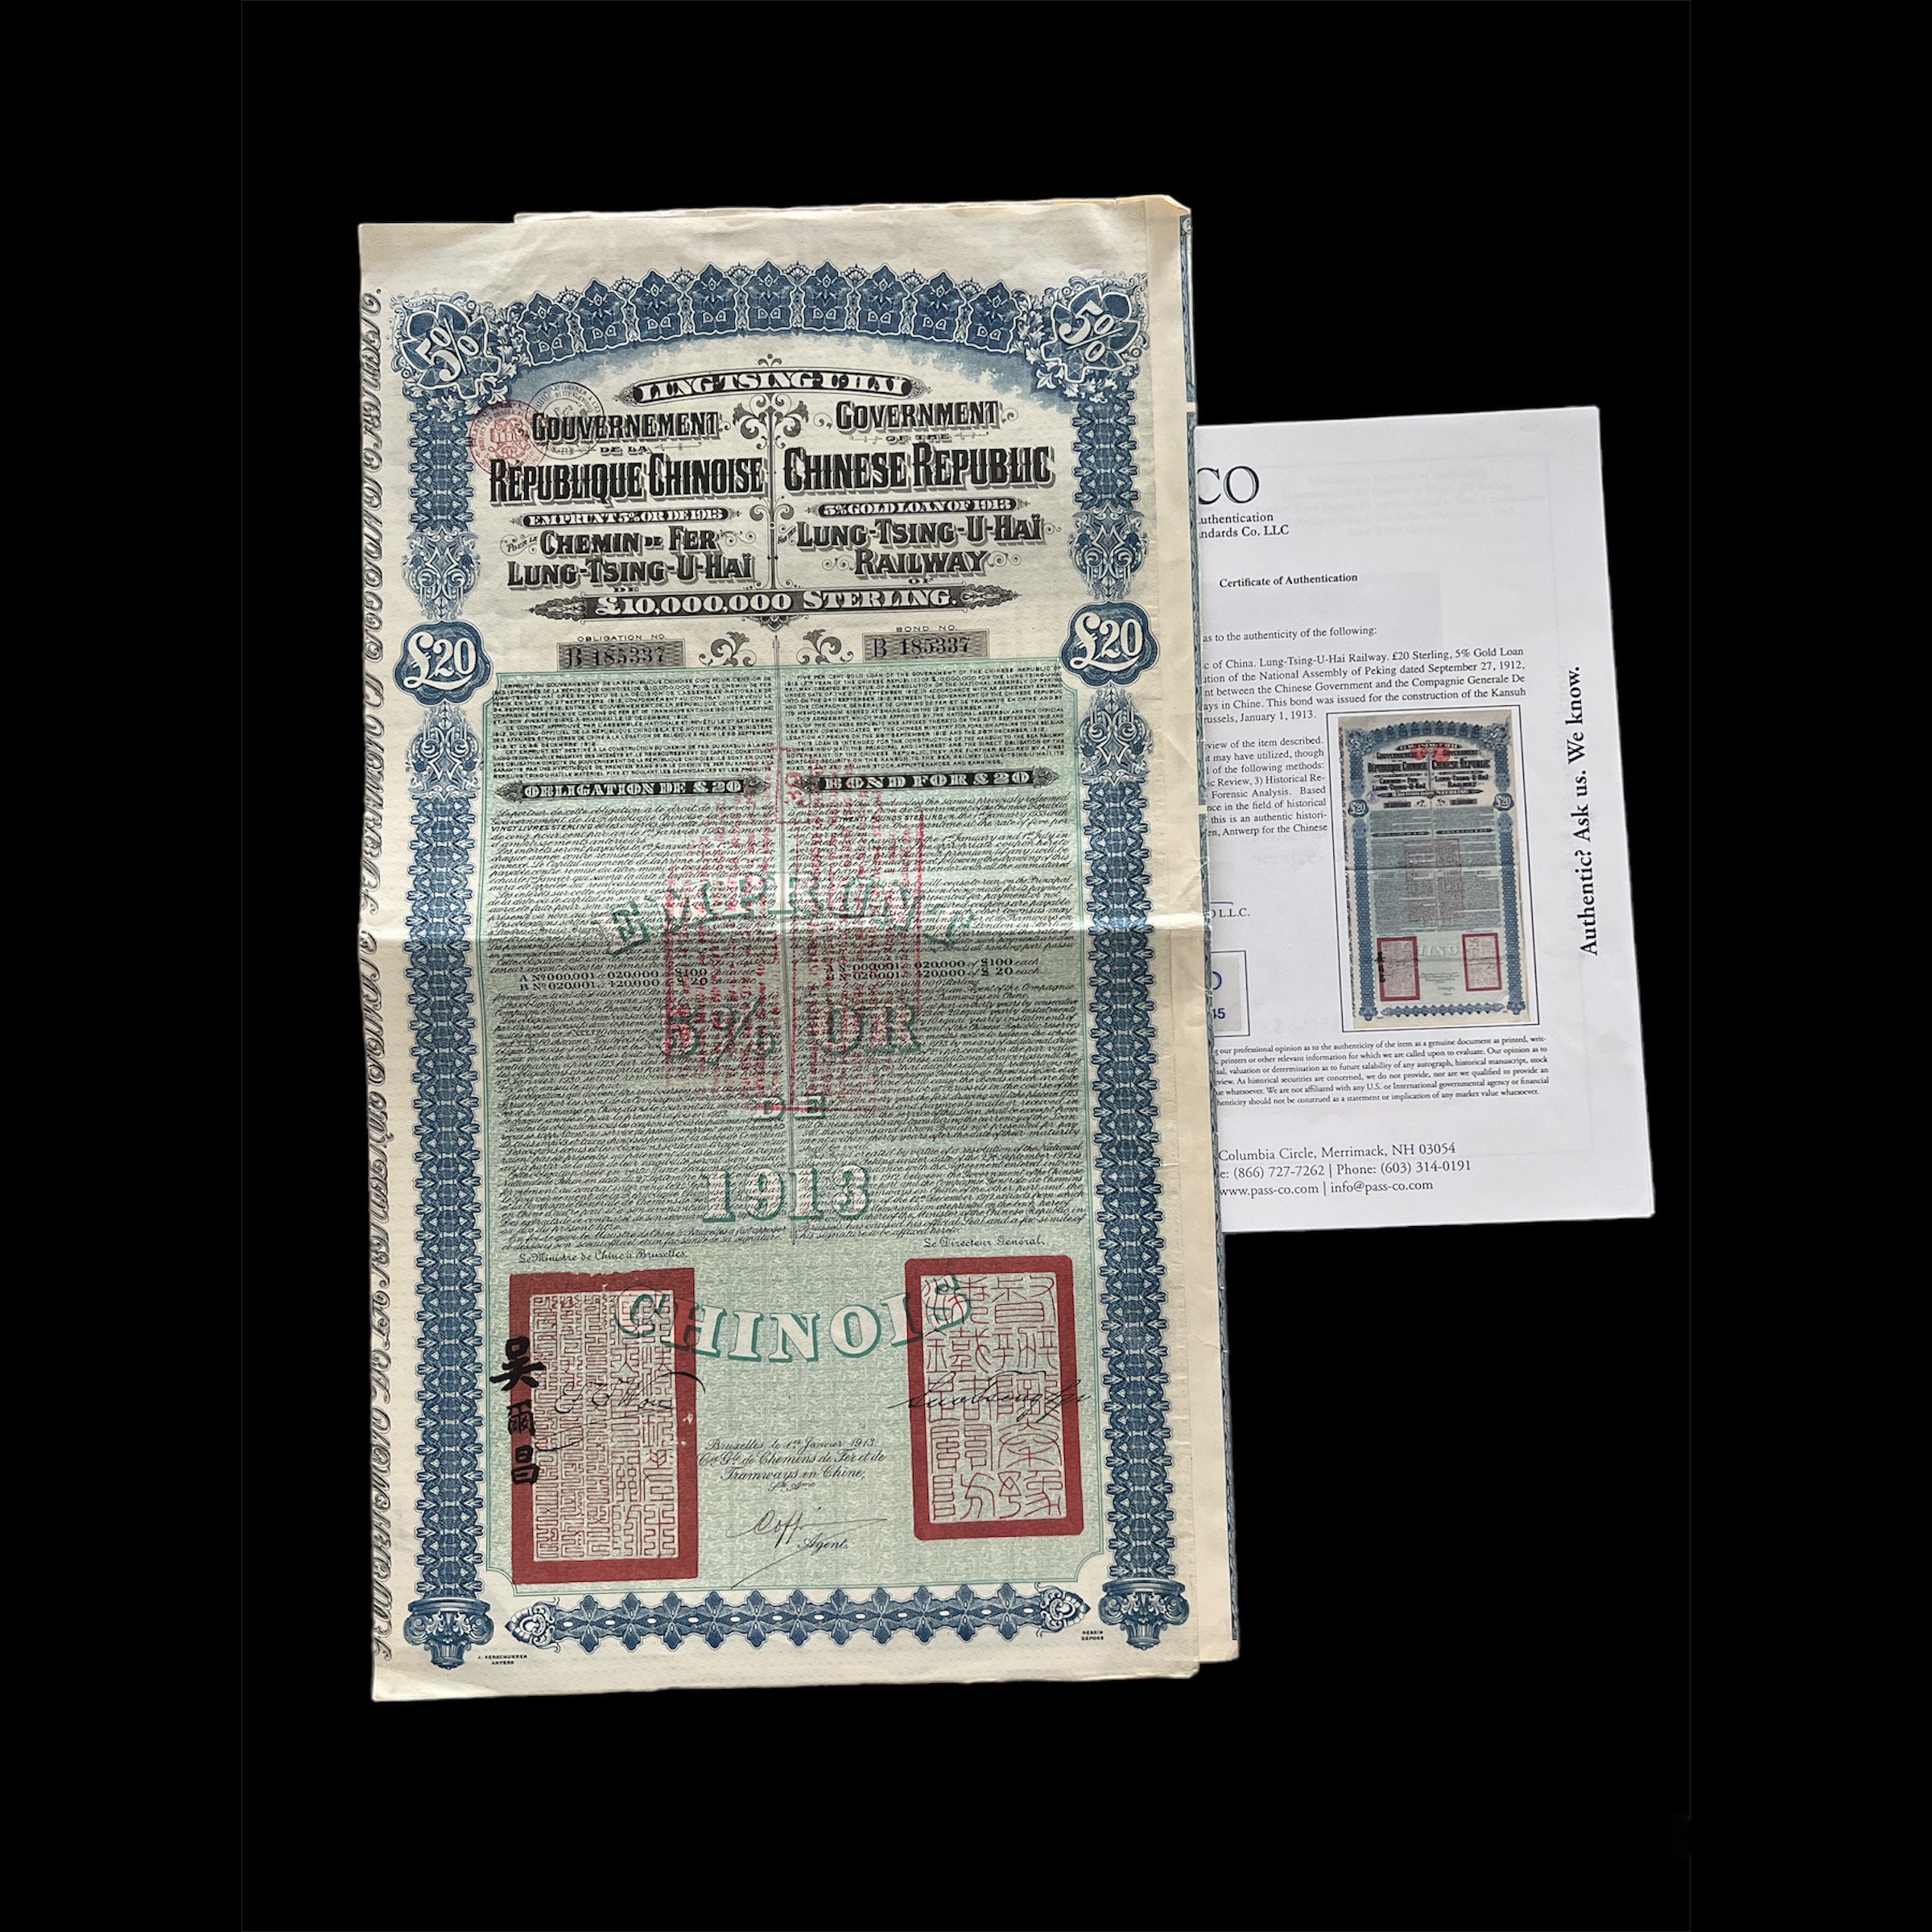 "Super Petchili" 1913 Government Chinese Republic – 5% Lung-Tsing-U-Haï Railway Gold Loan – £20 With PASSCO Certificate of Authentication